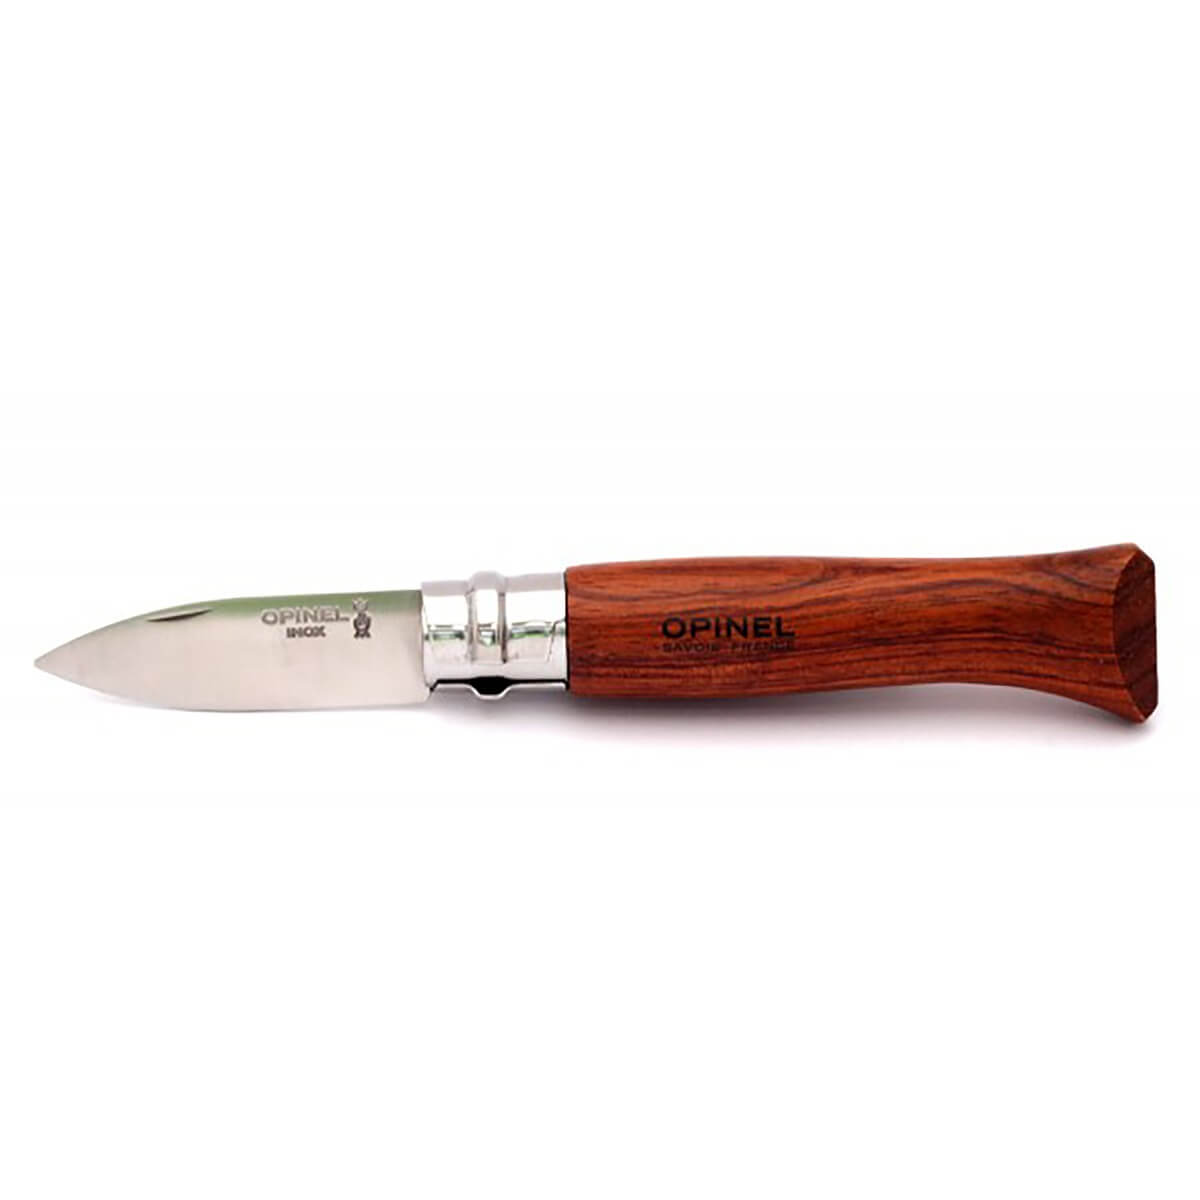 Opinel Oyster Shucking Knife